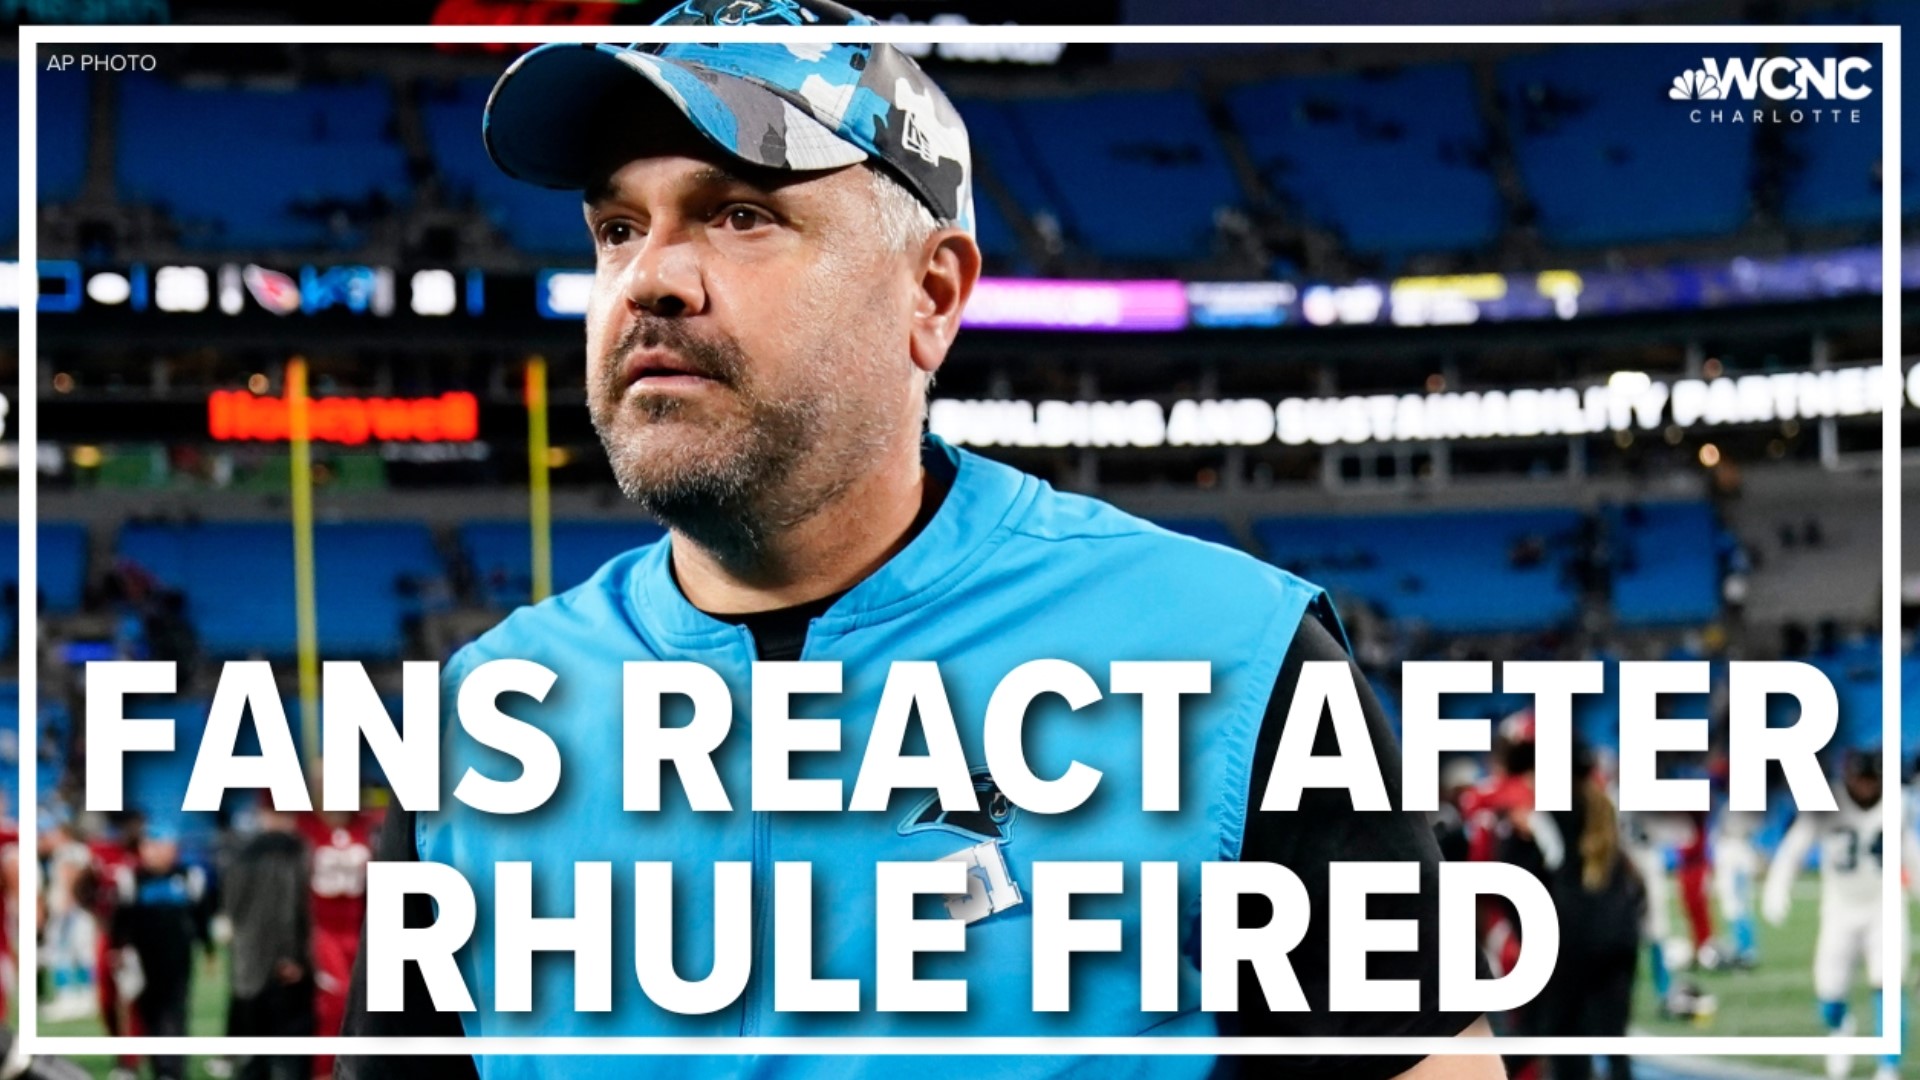 Carolina Panthers owner David Tepper said he "felt now was the time" to fire head coach Matt Rhule.